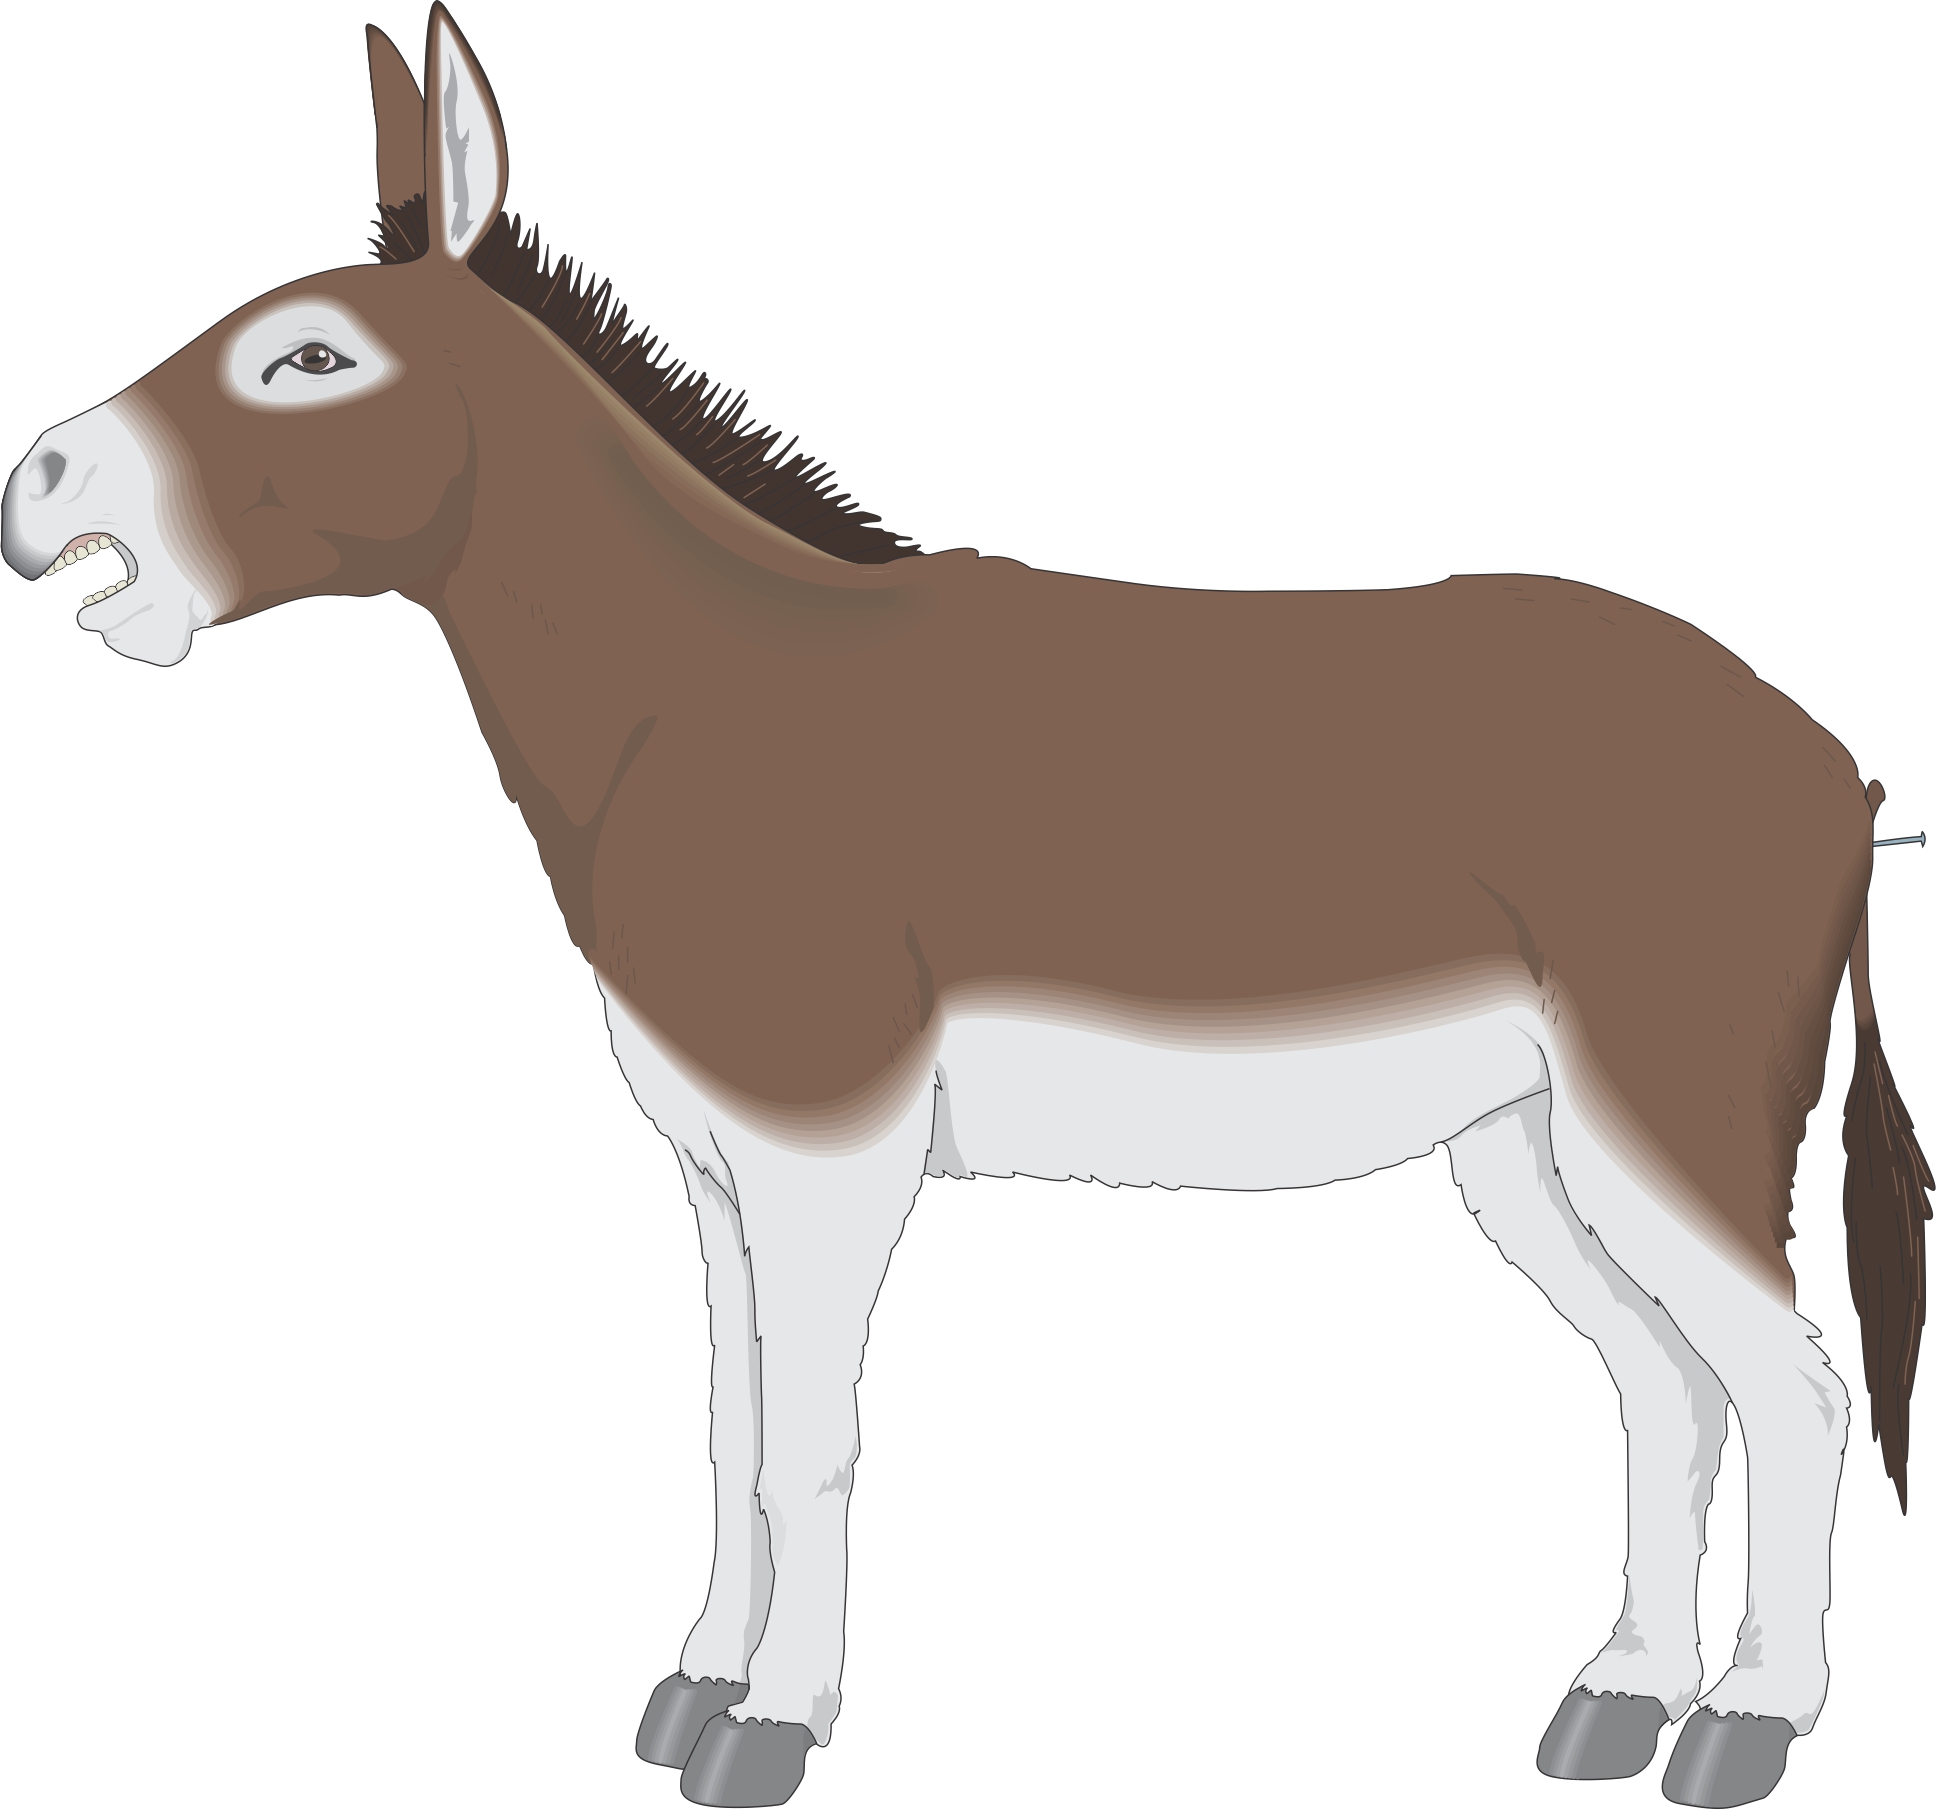 Back To Cartoon Clipart From Cartoon Donkey This List Of